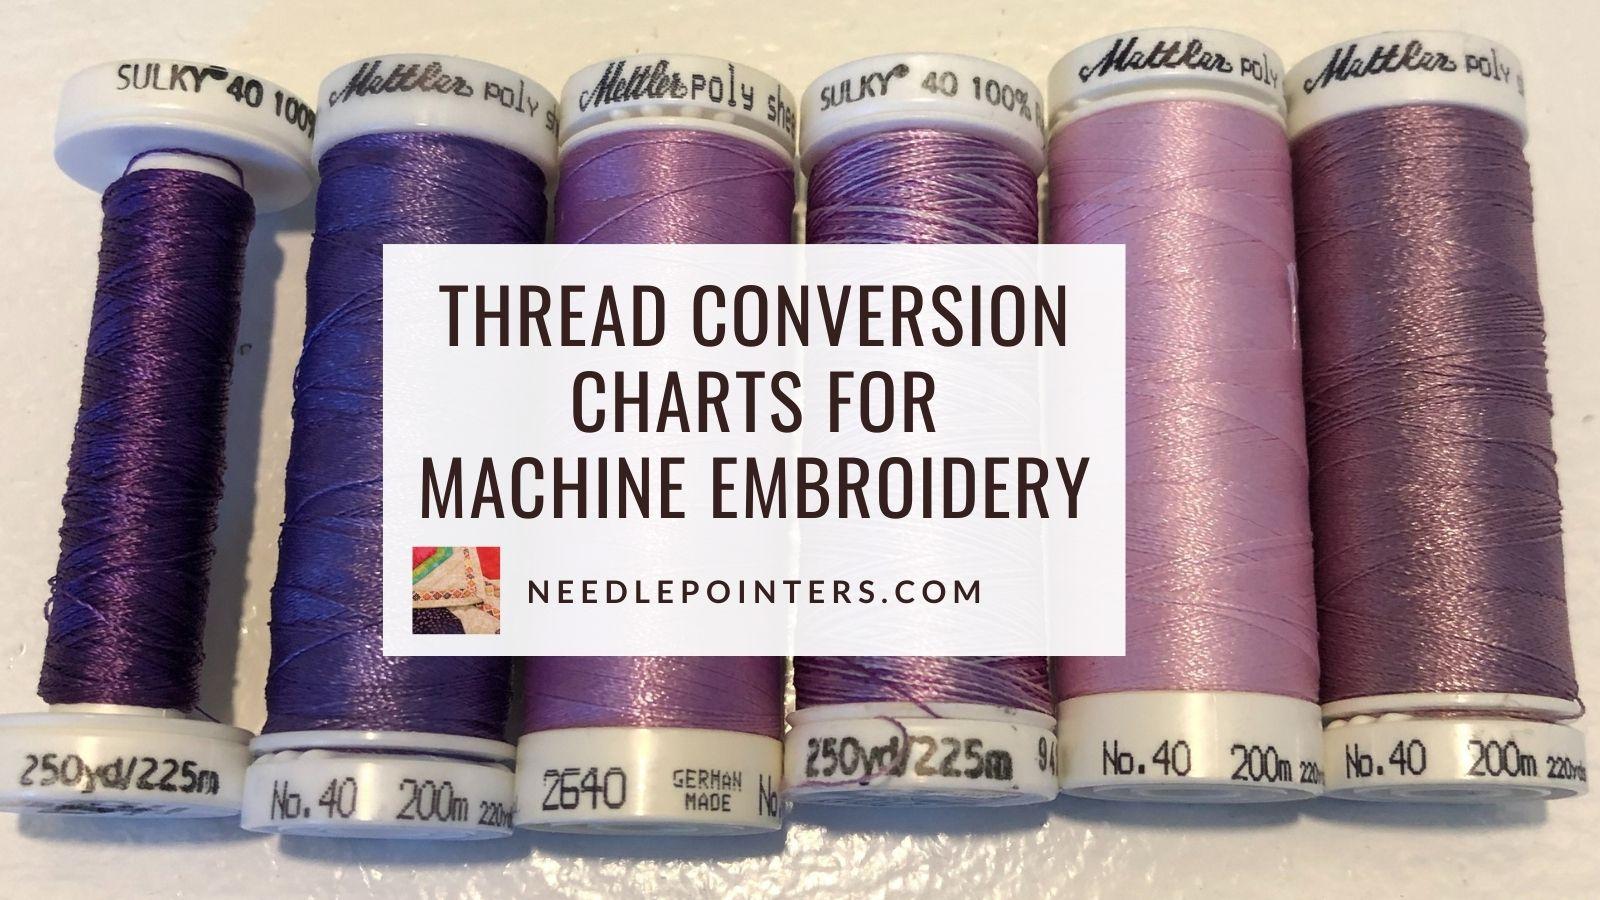 Gold Beige 1070 Madeira Rayon 40 wt. Machine Embroidery Thread